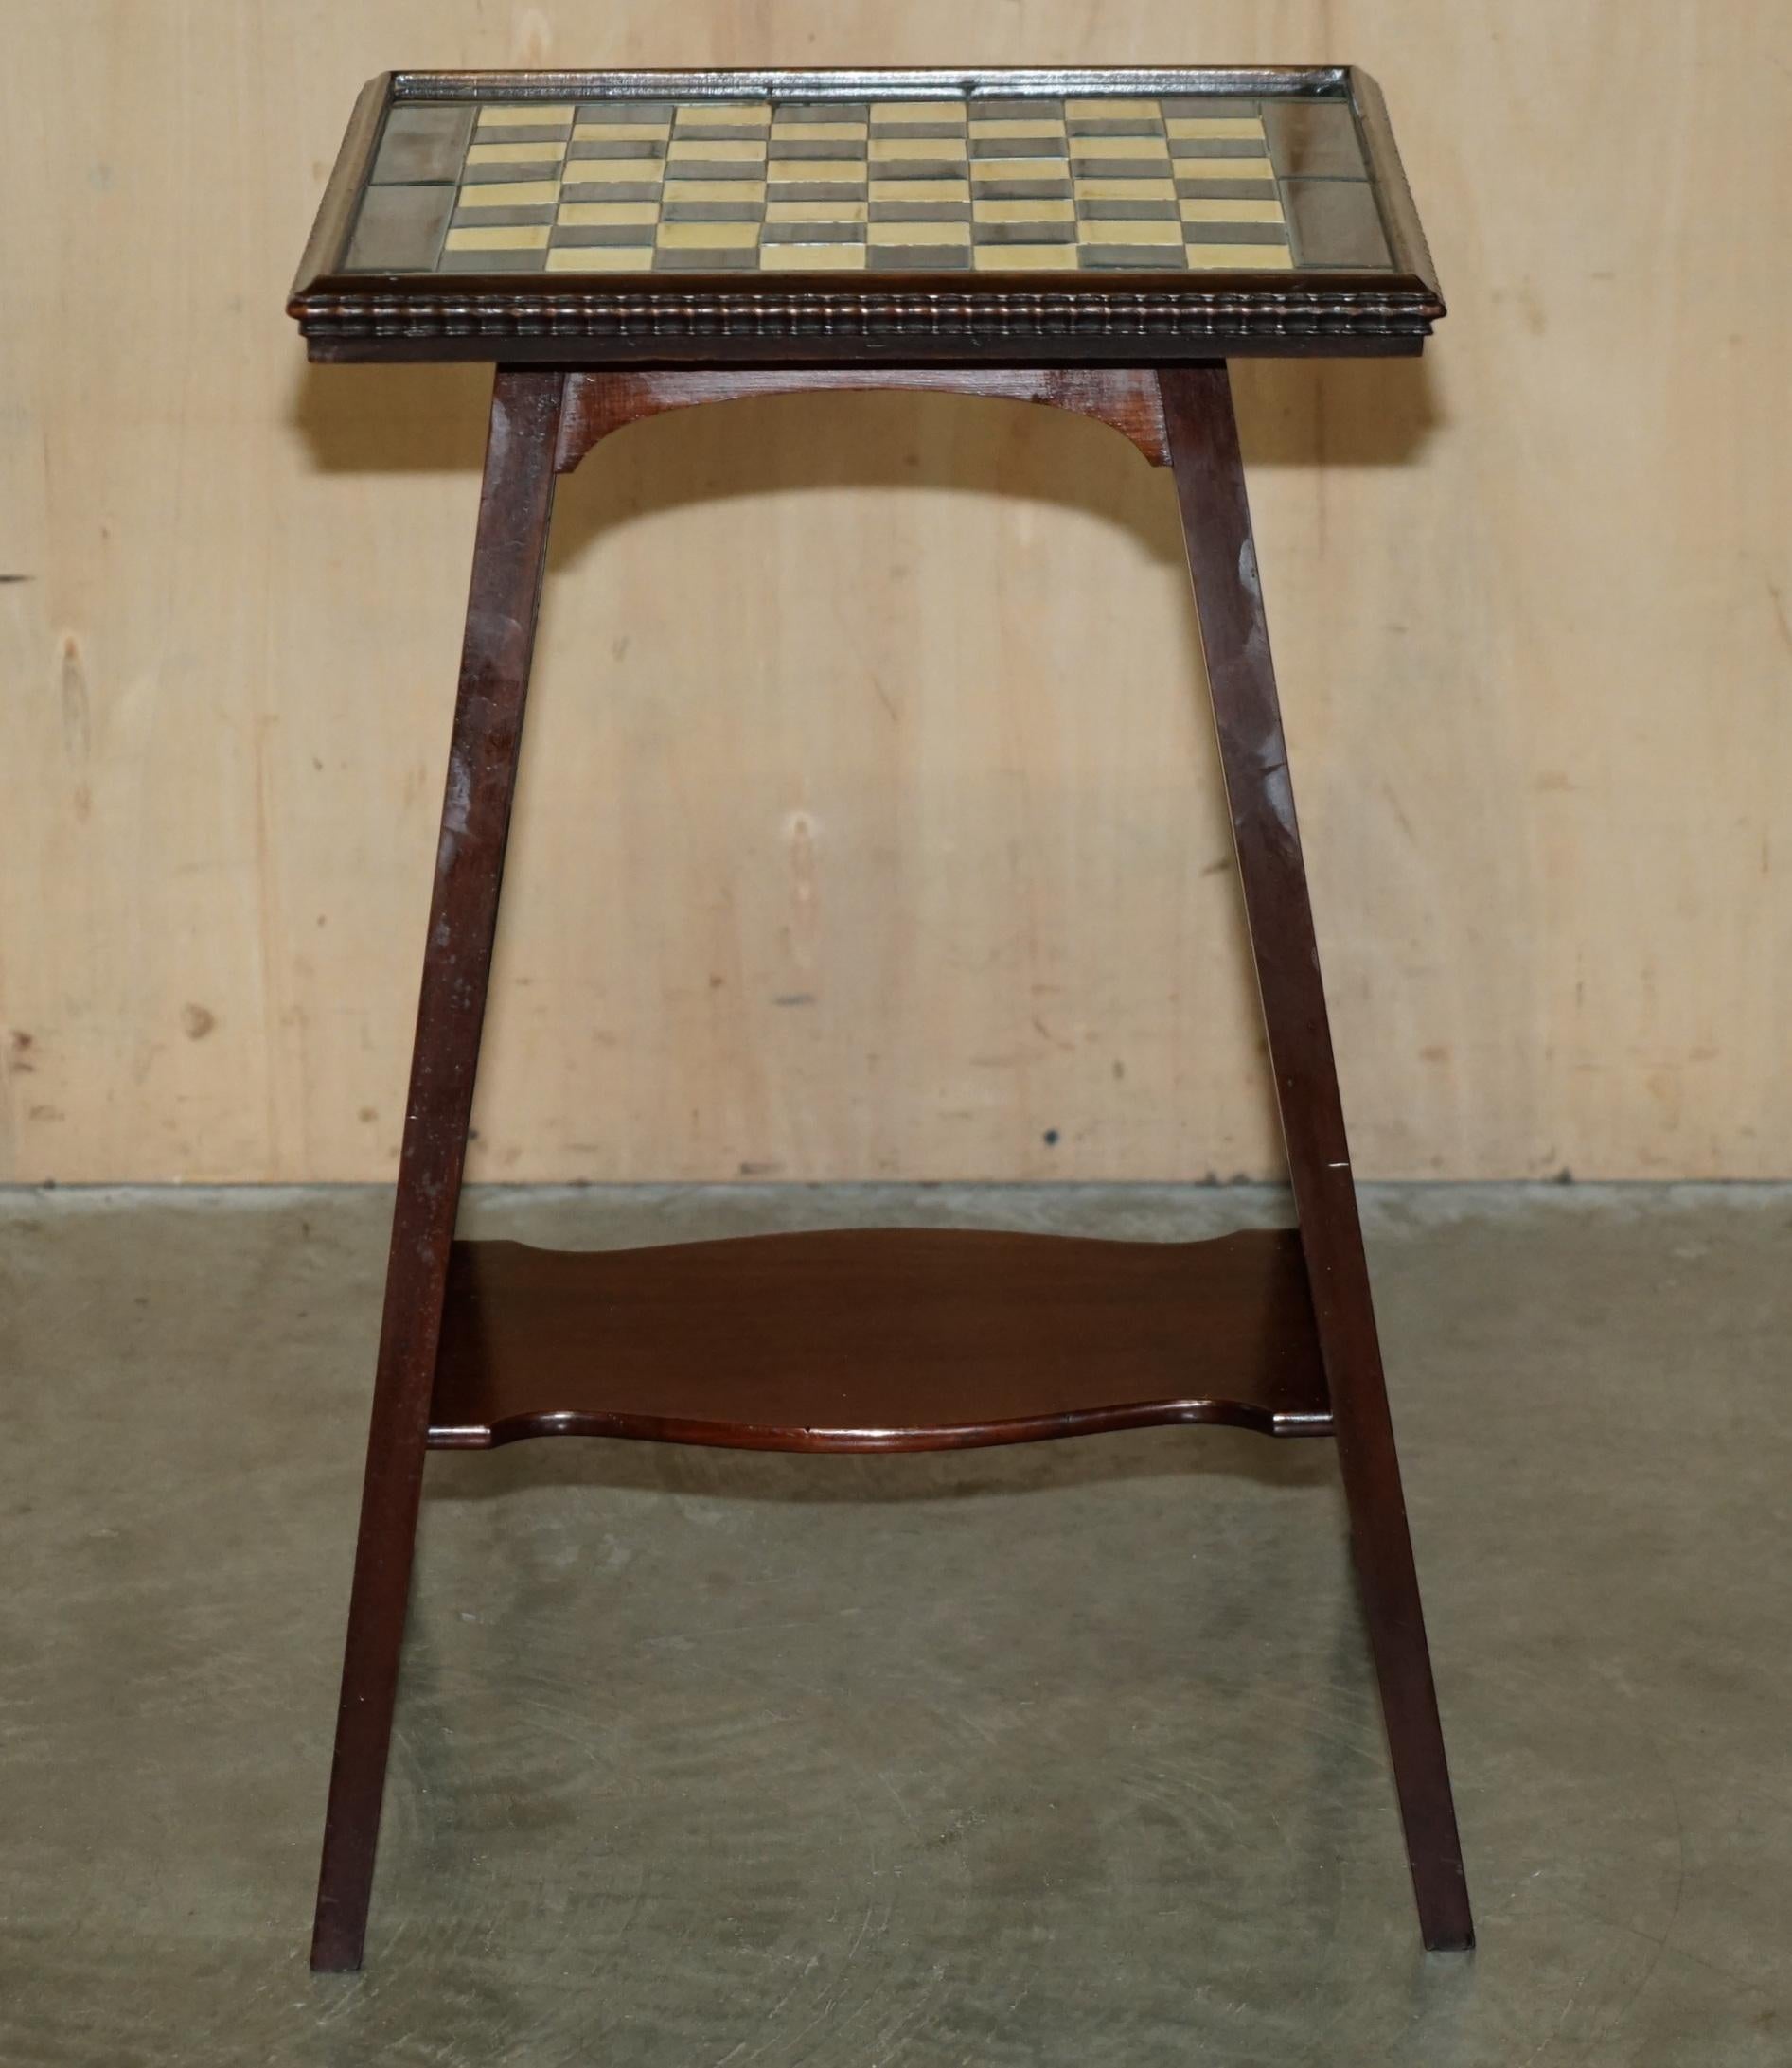 Aesthetic Movement ANTIQUE VICTORIAN AESTHETIC MOVEMENT STYLE TiLED TOP CHESSBOARD CHESS TABLE For Sale